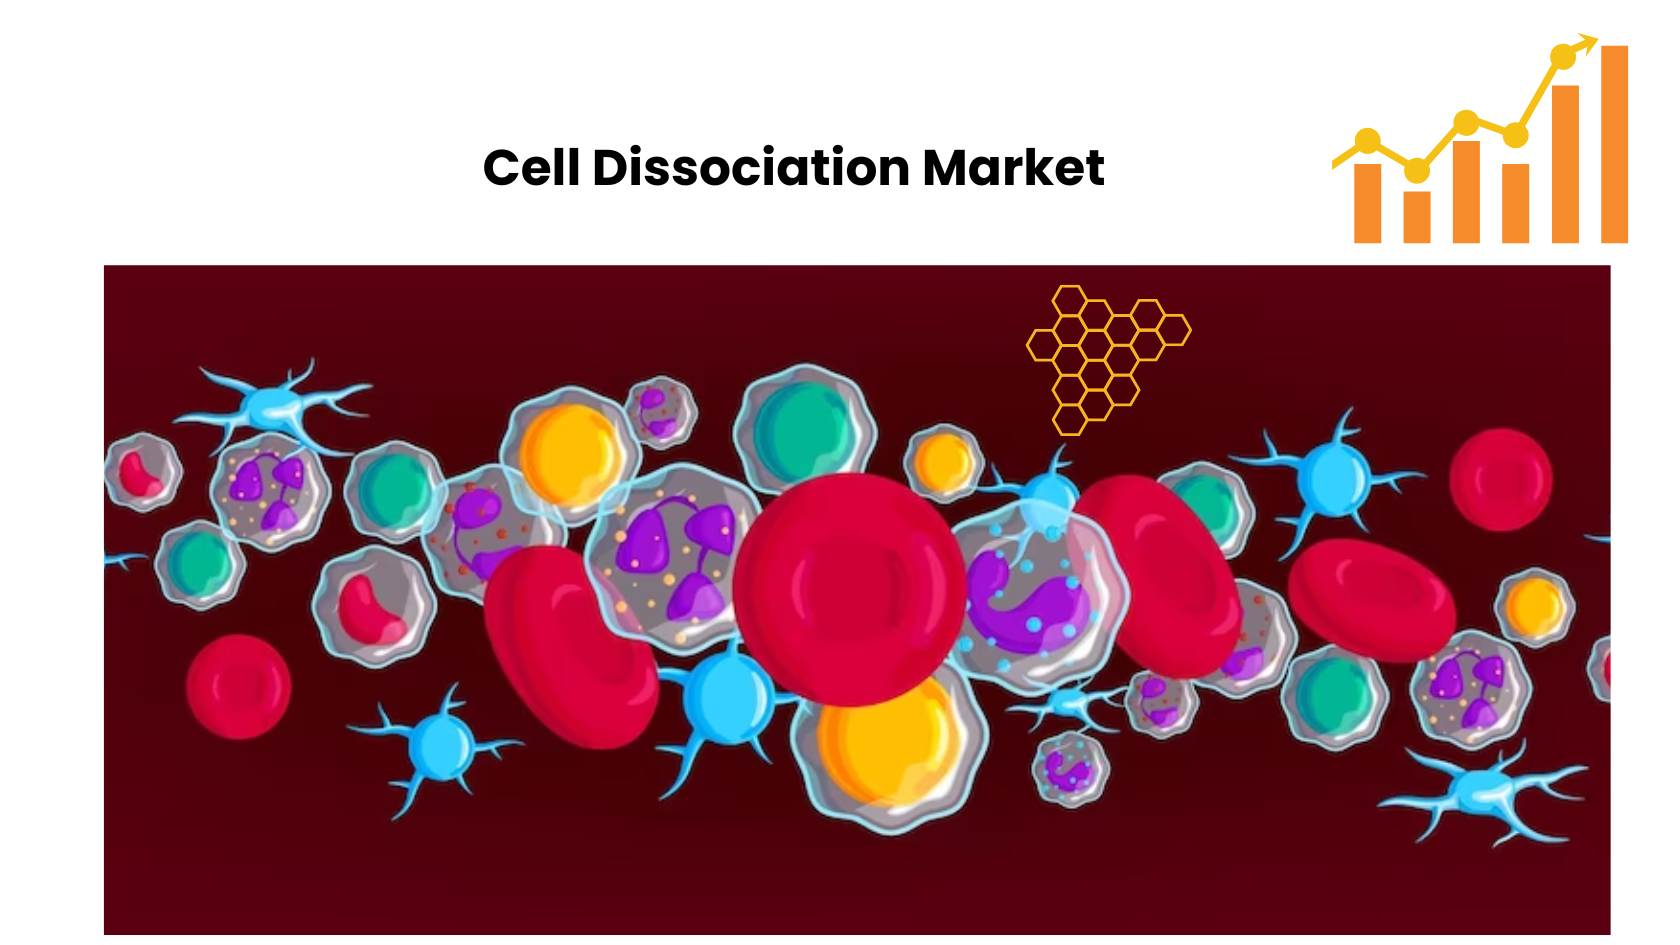 Cell Dissociation Market To Develop Speedily With CAGR Of 13.3% By 2032 | According To Market.us